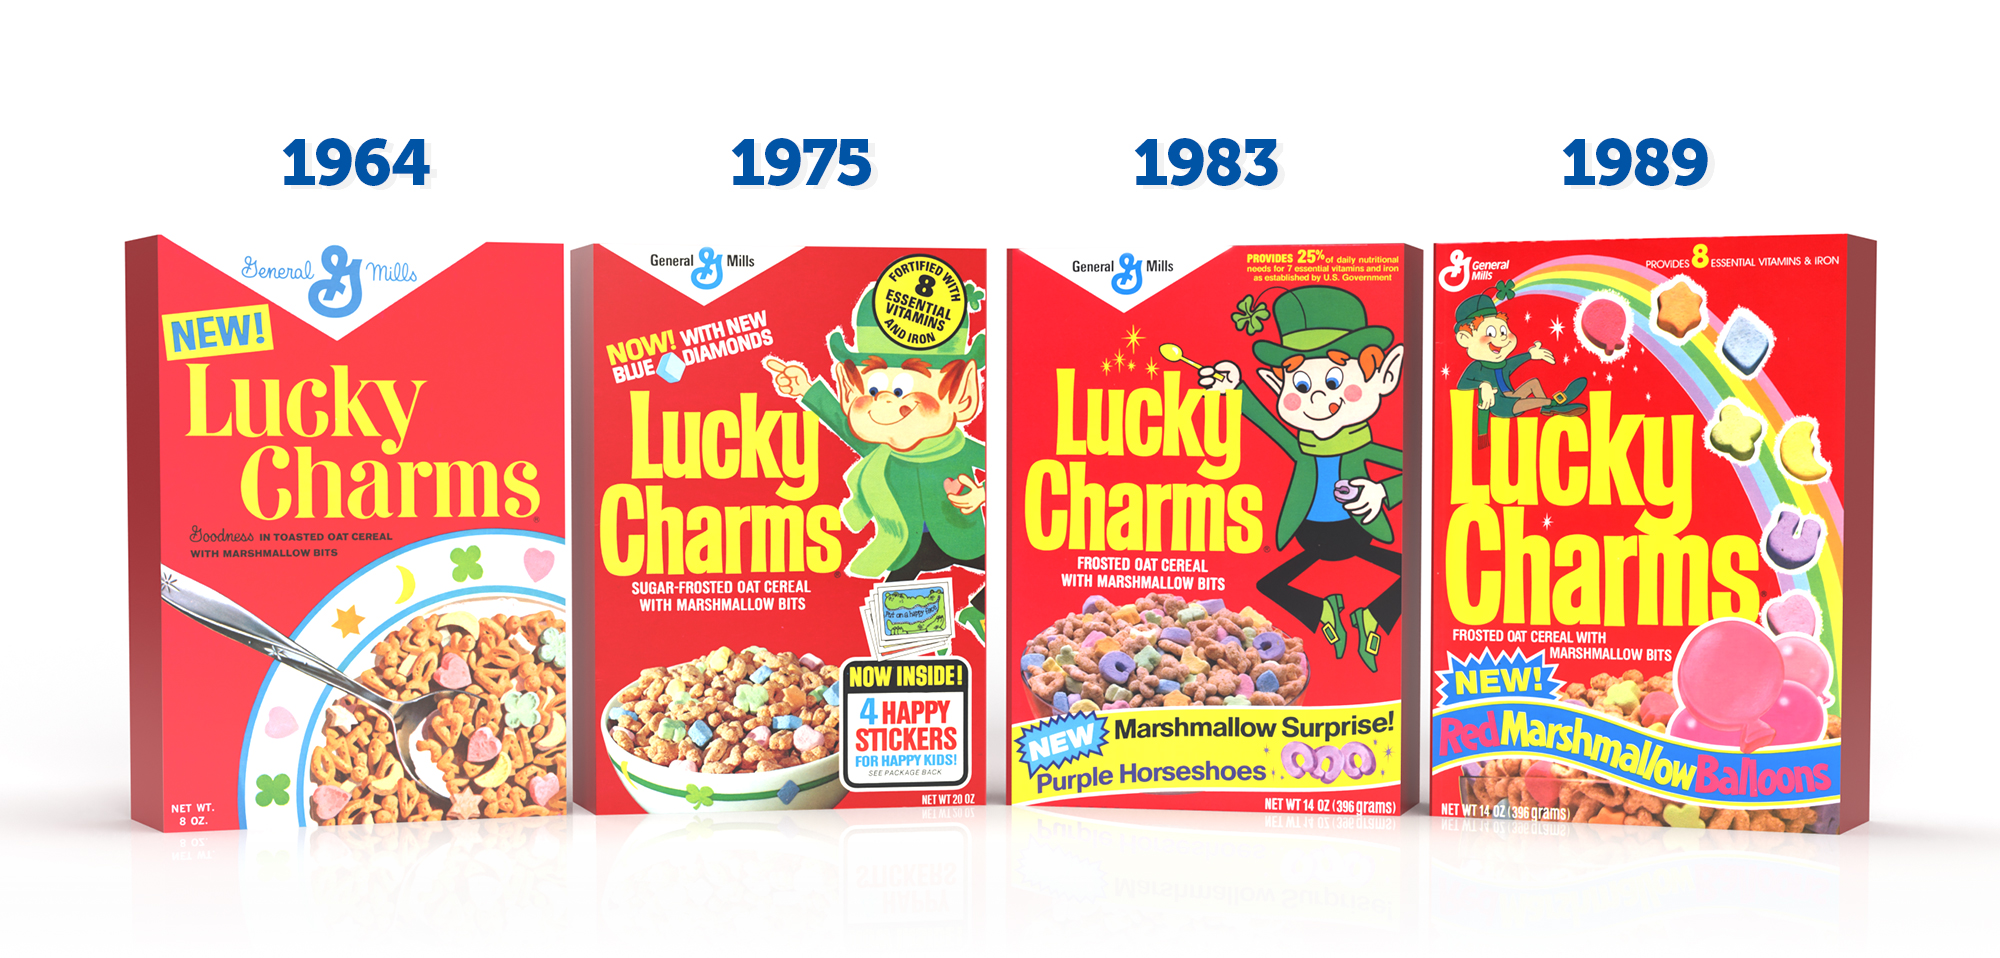 Lucky Charms boxes from 1964 to 1989